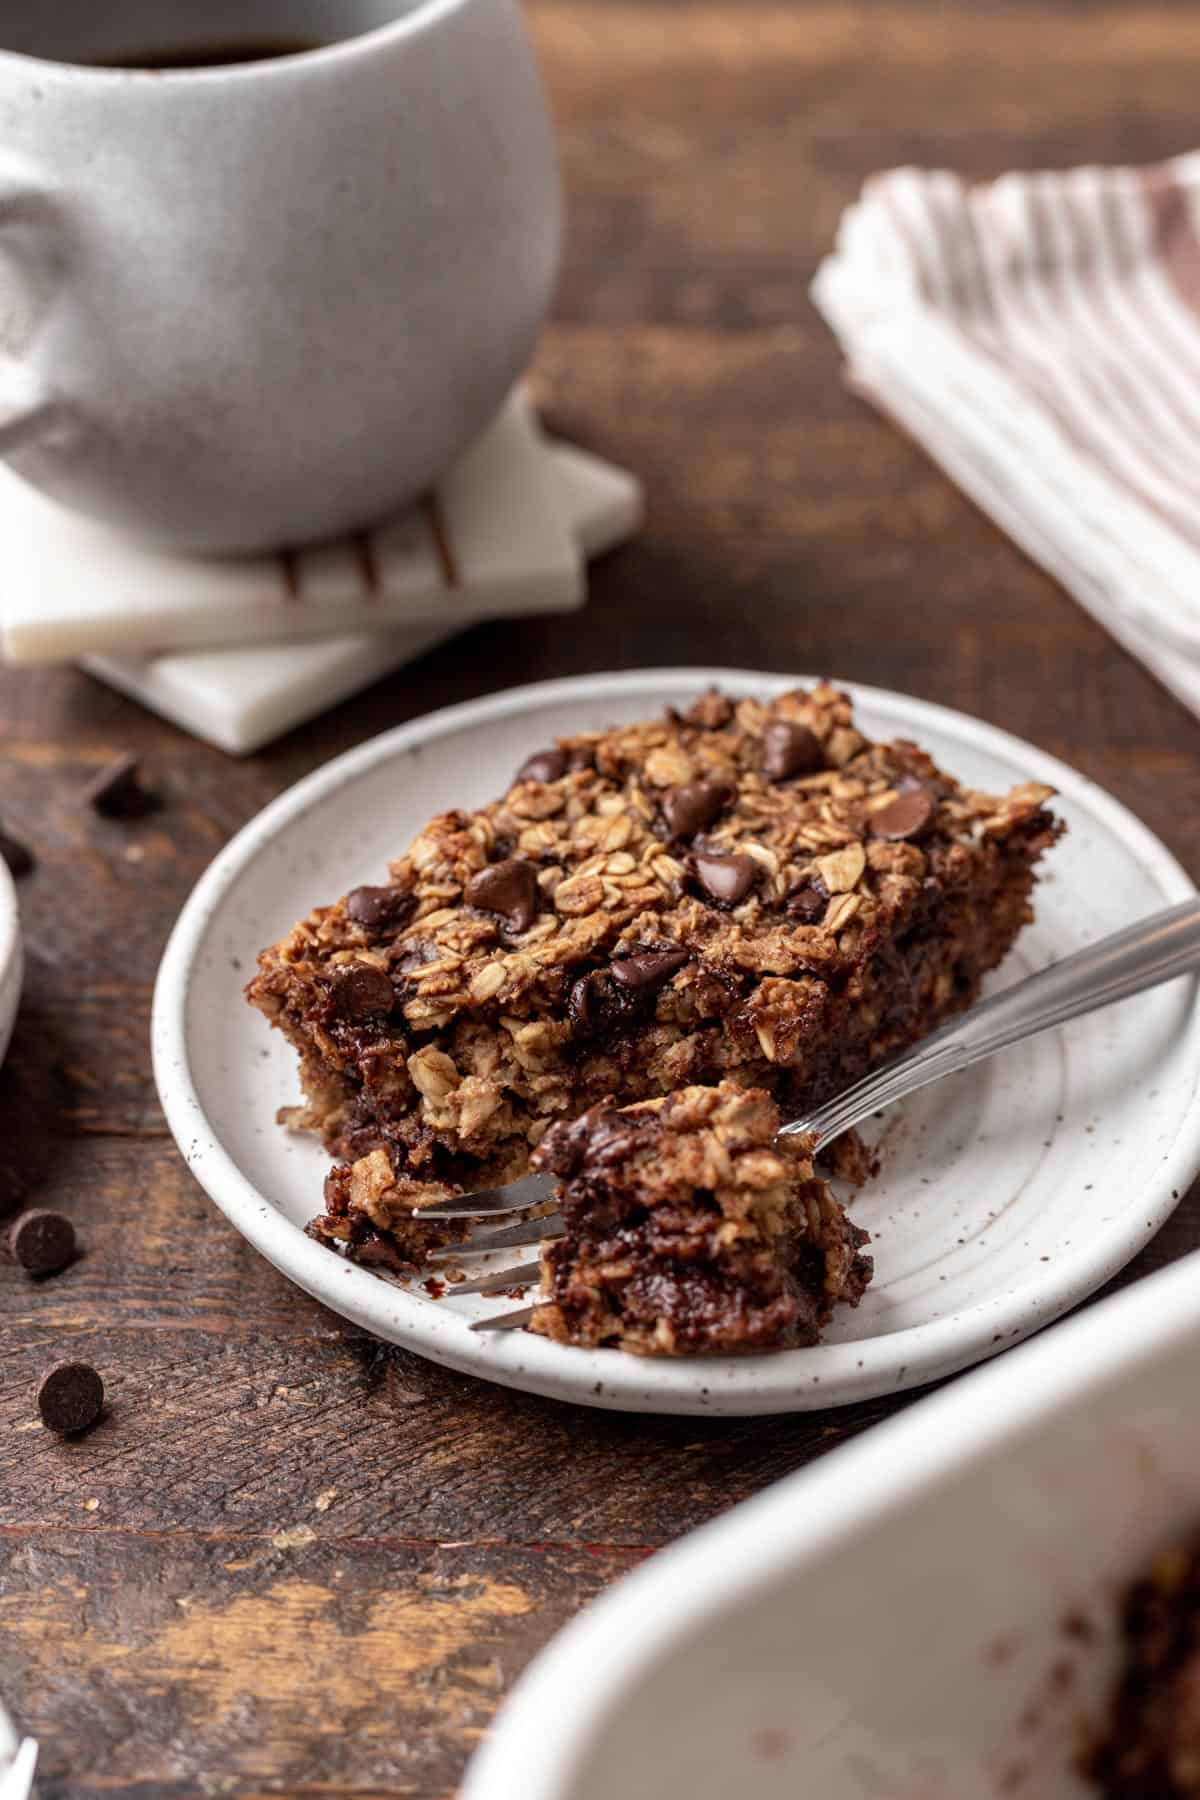 A slice of chocolate baked oats on a white plate with a fork.